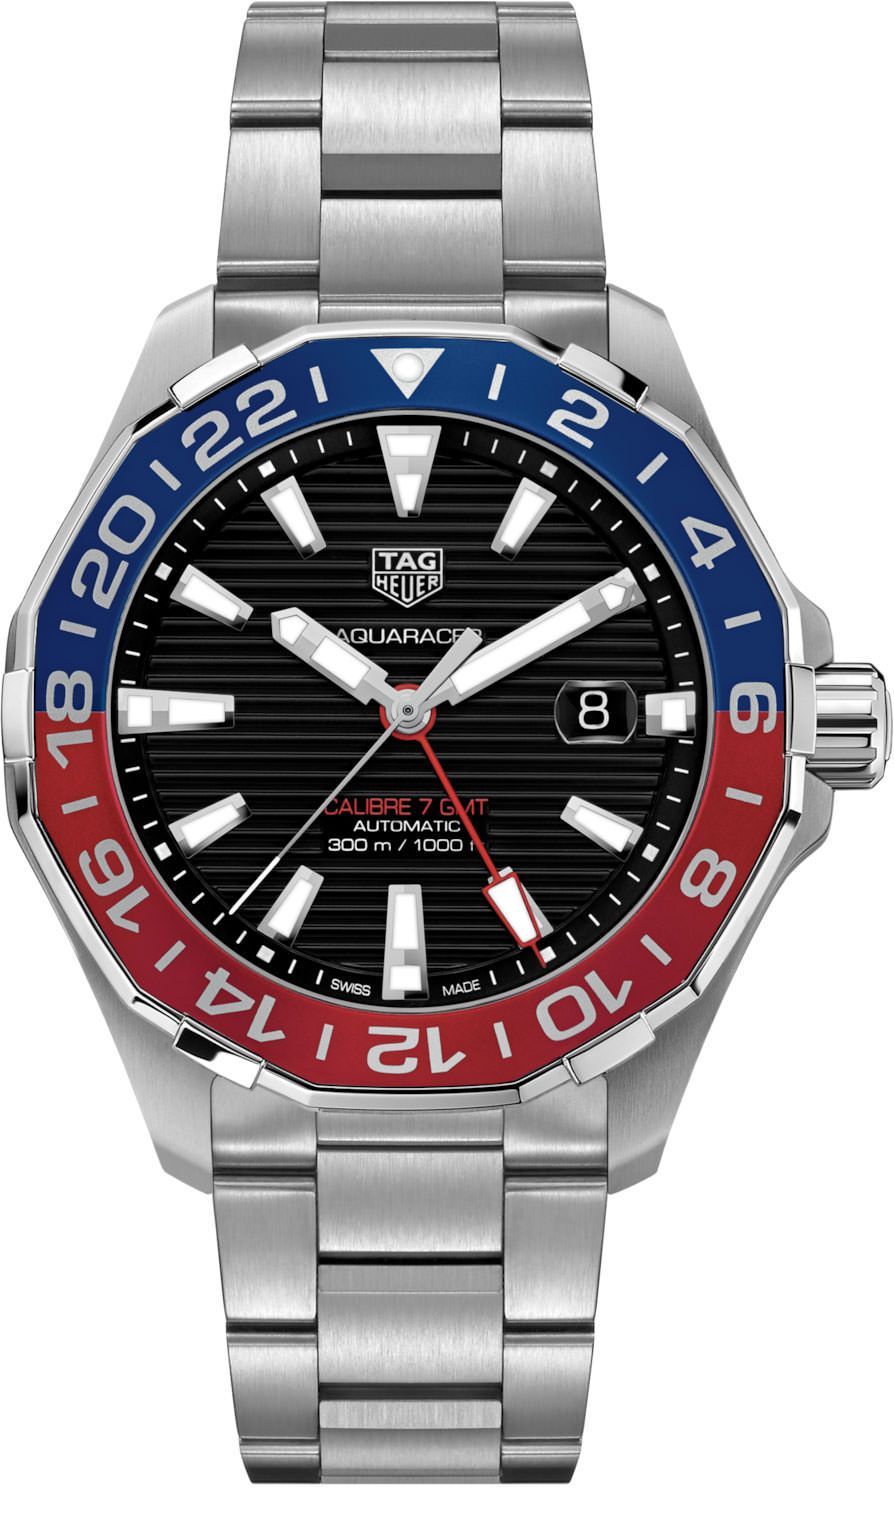 TAG Heuer Professional 300 43 mm Watch in Black Dial For Men - 1